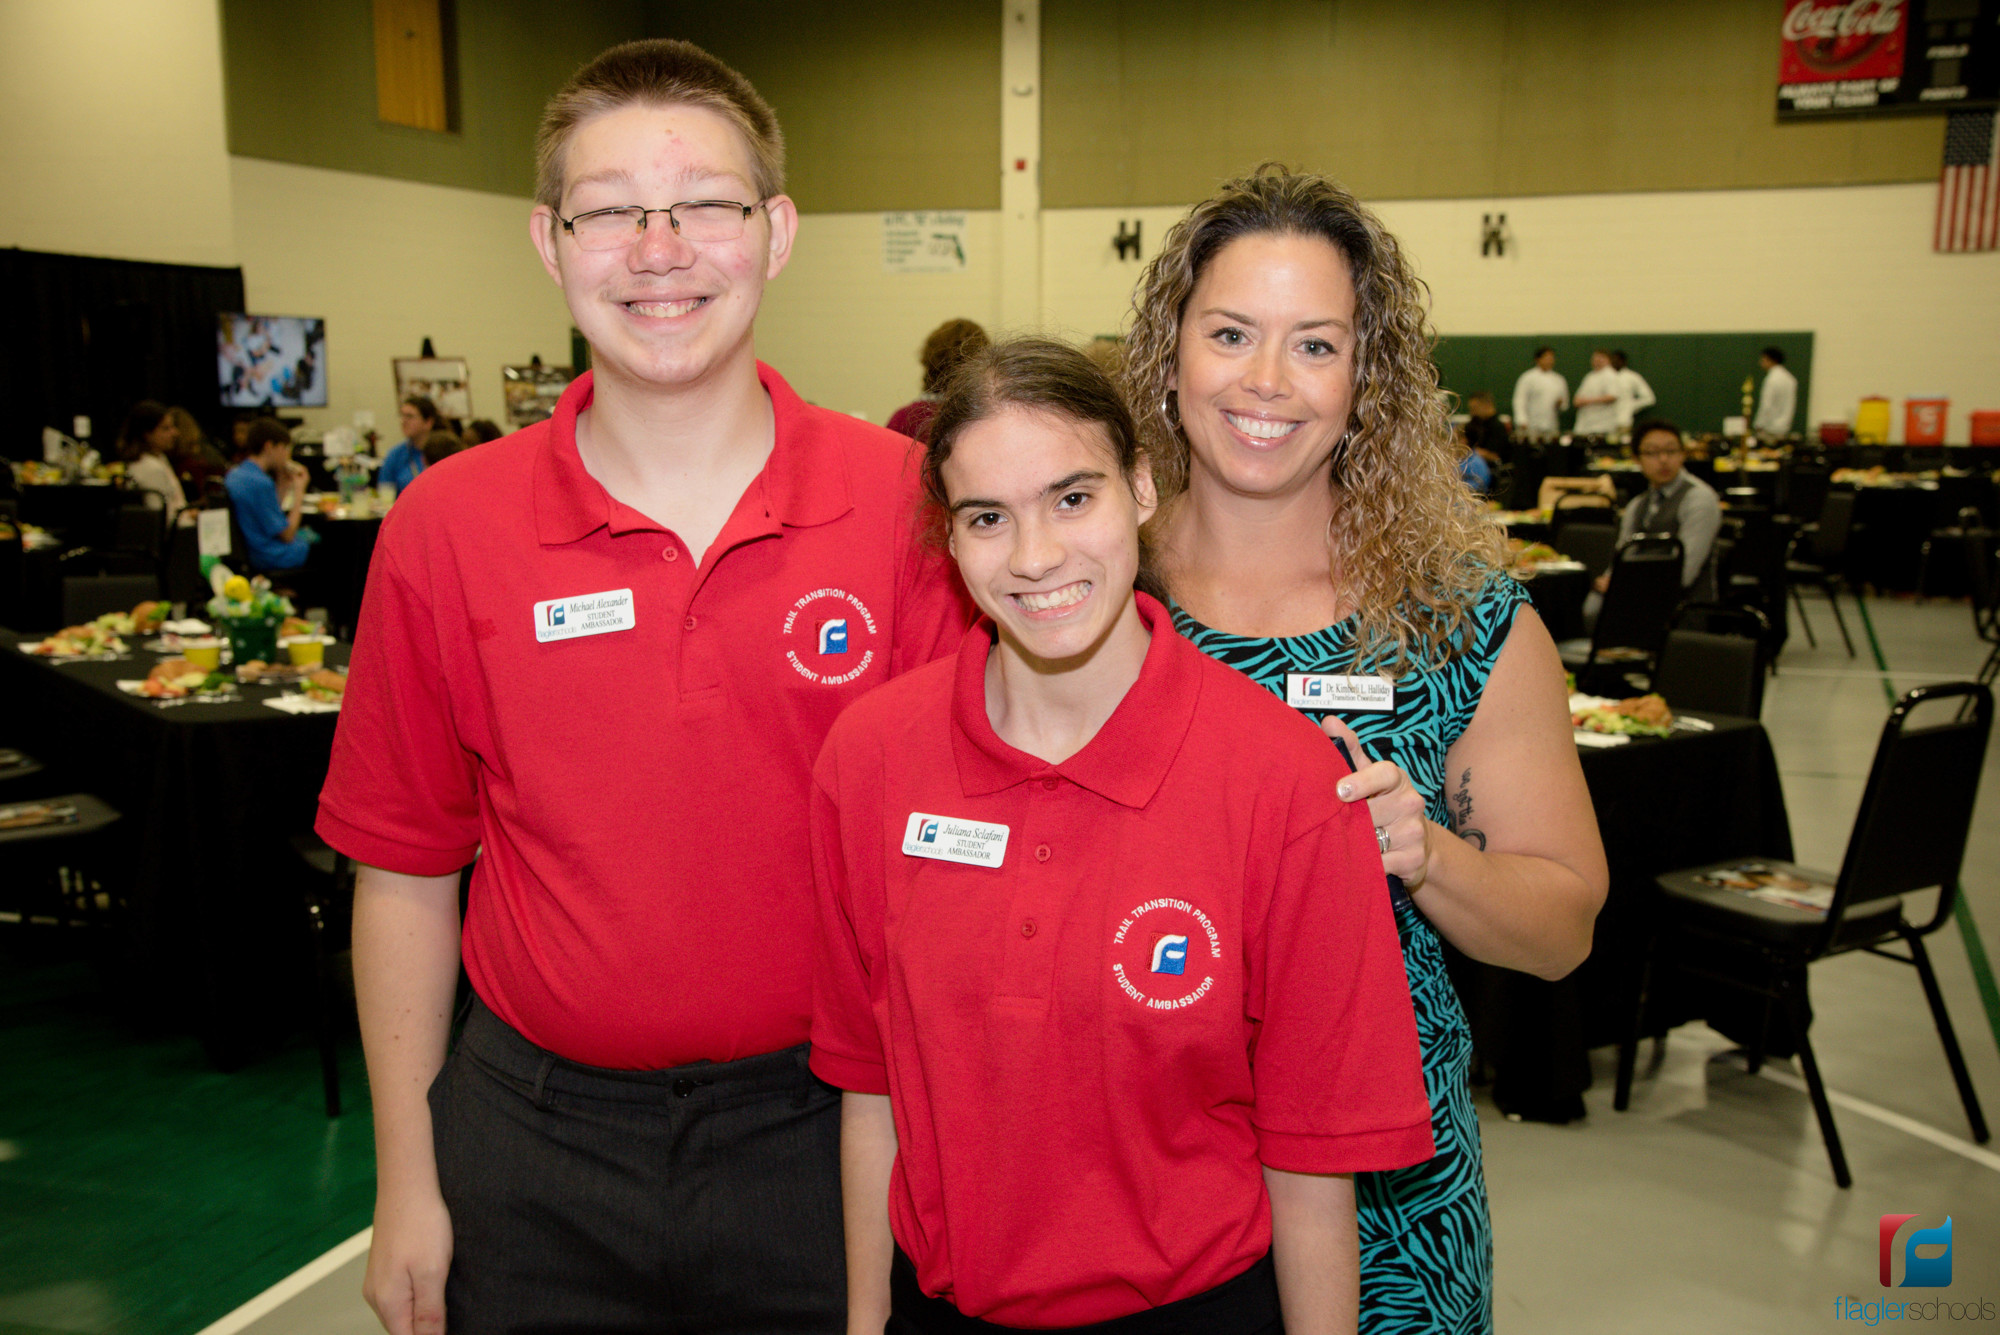 Student ambassadors from the TRAIL Program, Michael Alexander and Juliana Sclafani, pose with TRAIL Program Coordinator Dr. Kim Halliday at the Classroom to Careers Symposium on April 12. Photo courtesy of Jason Wheeler